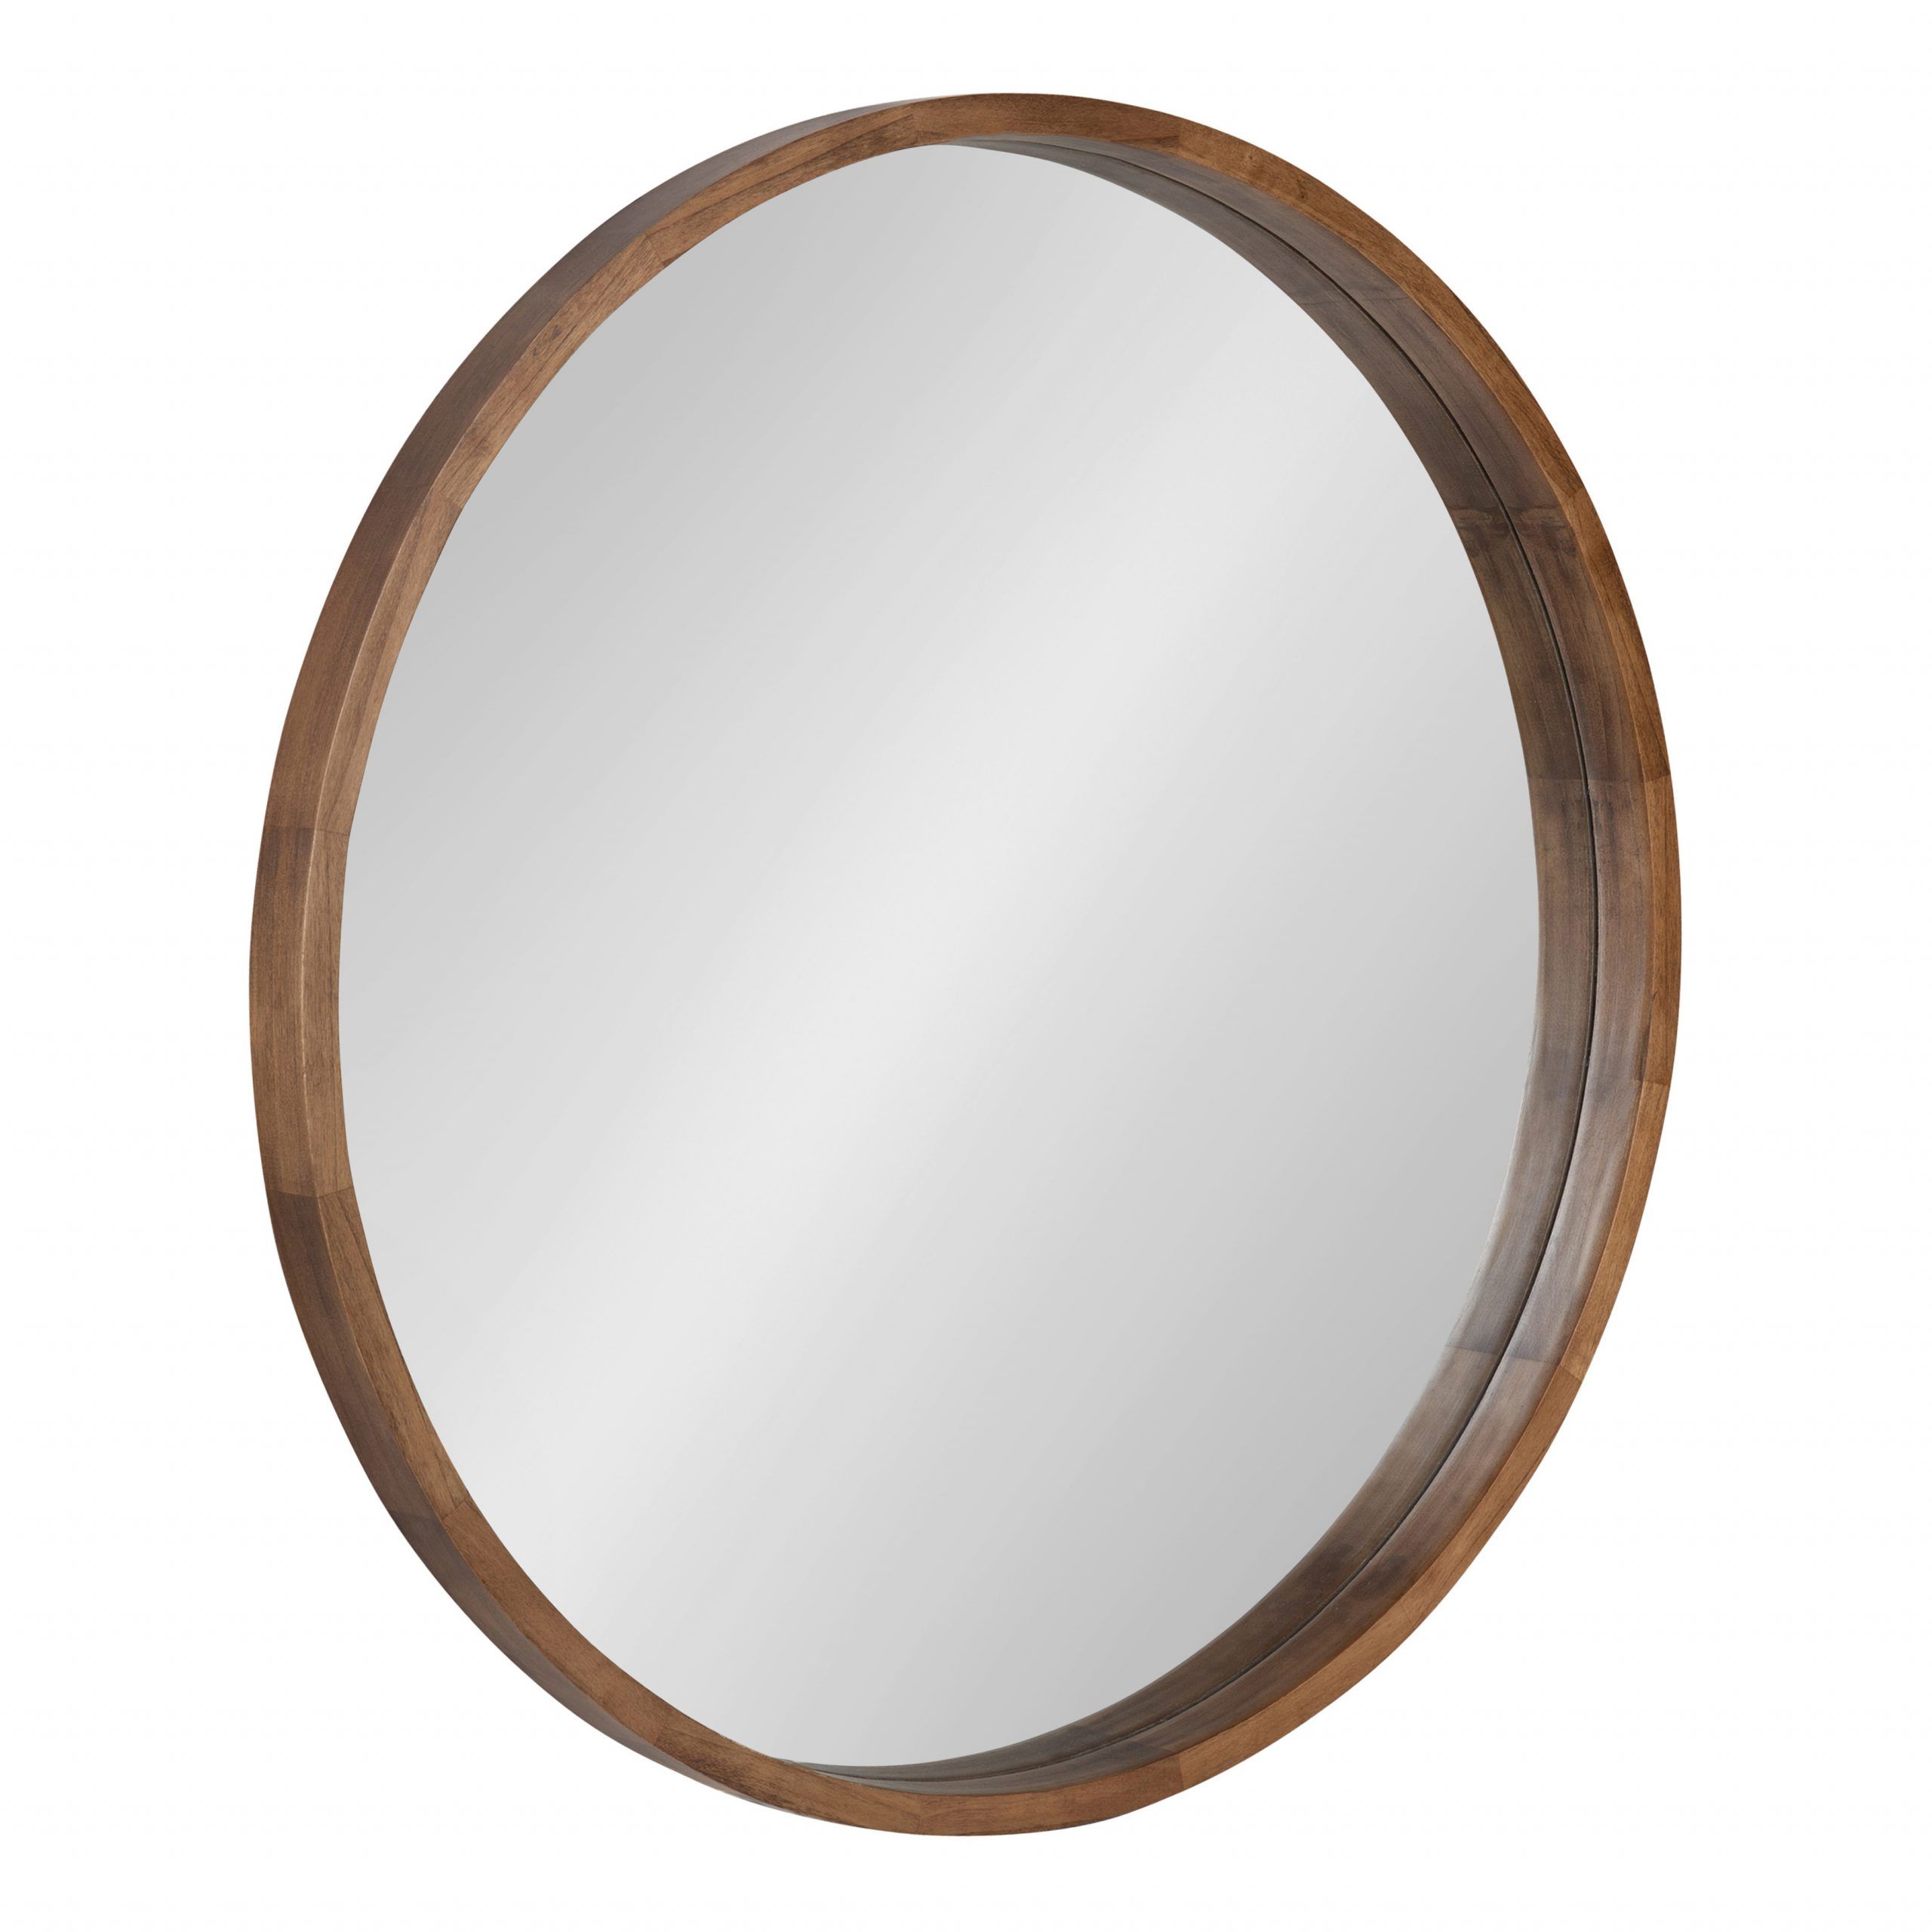 Kate And Laurel Hutton Round Wood Framed Wall Mirror, 36" Diameter Regarding Mocha Brown Wall Mirrors (View 5 of 15)